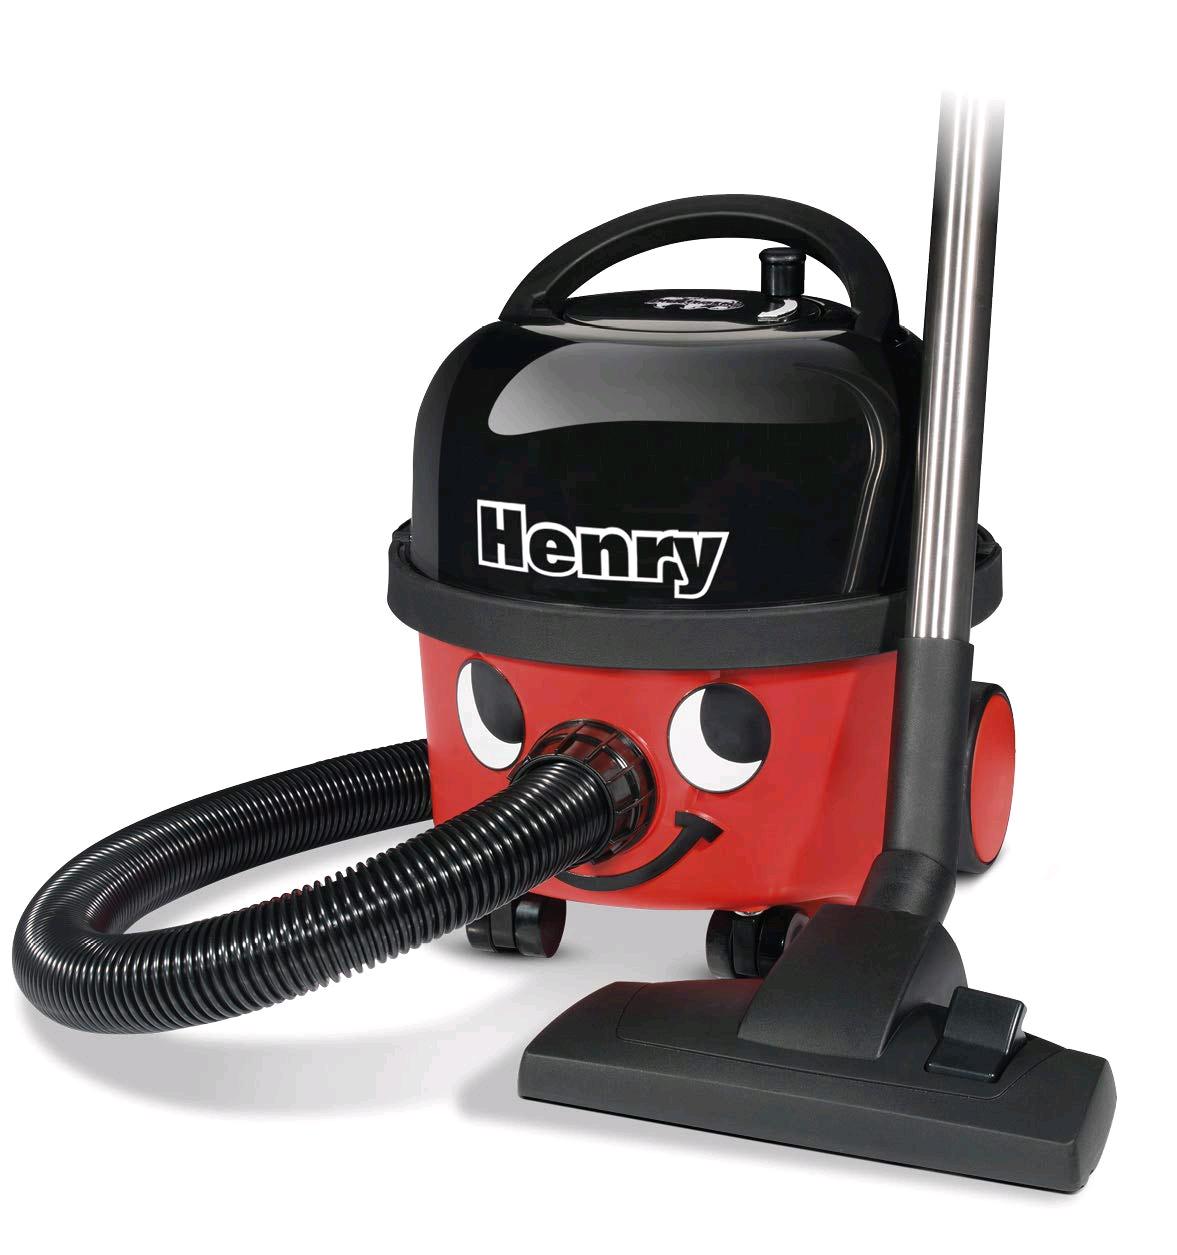 Numatic NVR240-11 Cylinder Cleaner - Henry Equivalent Dry Vacuum Cleaner, 9 Litre, 580 W, Red 